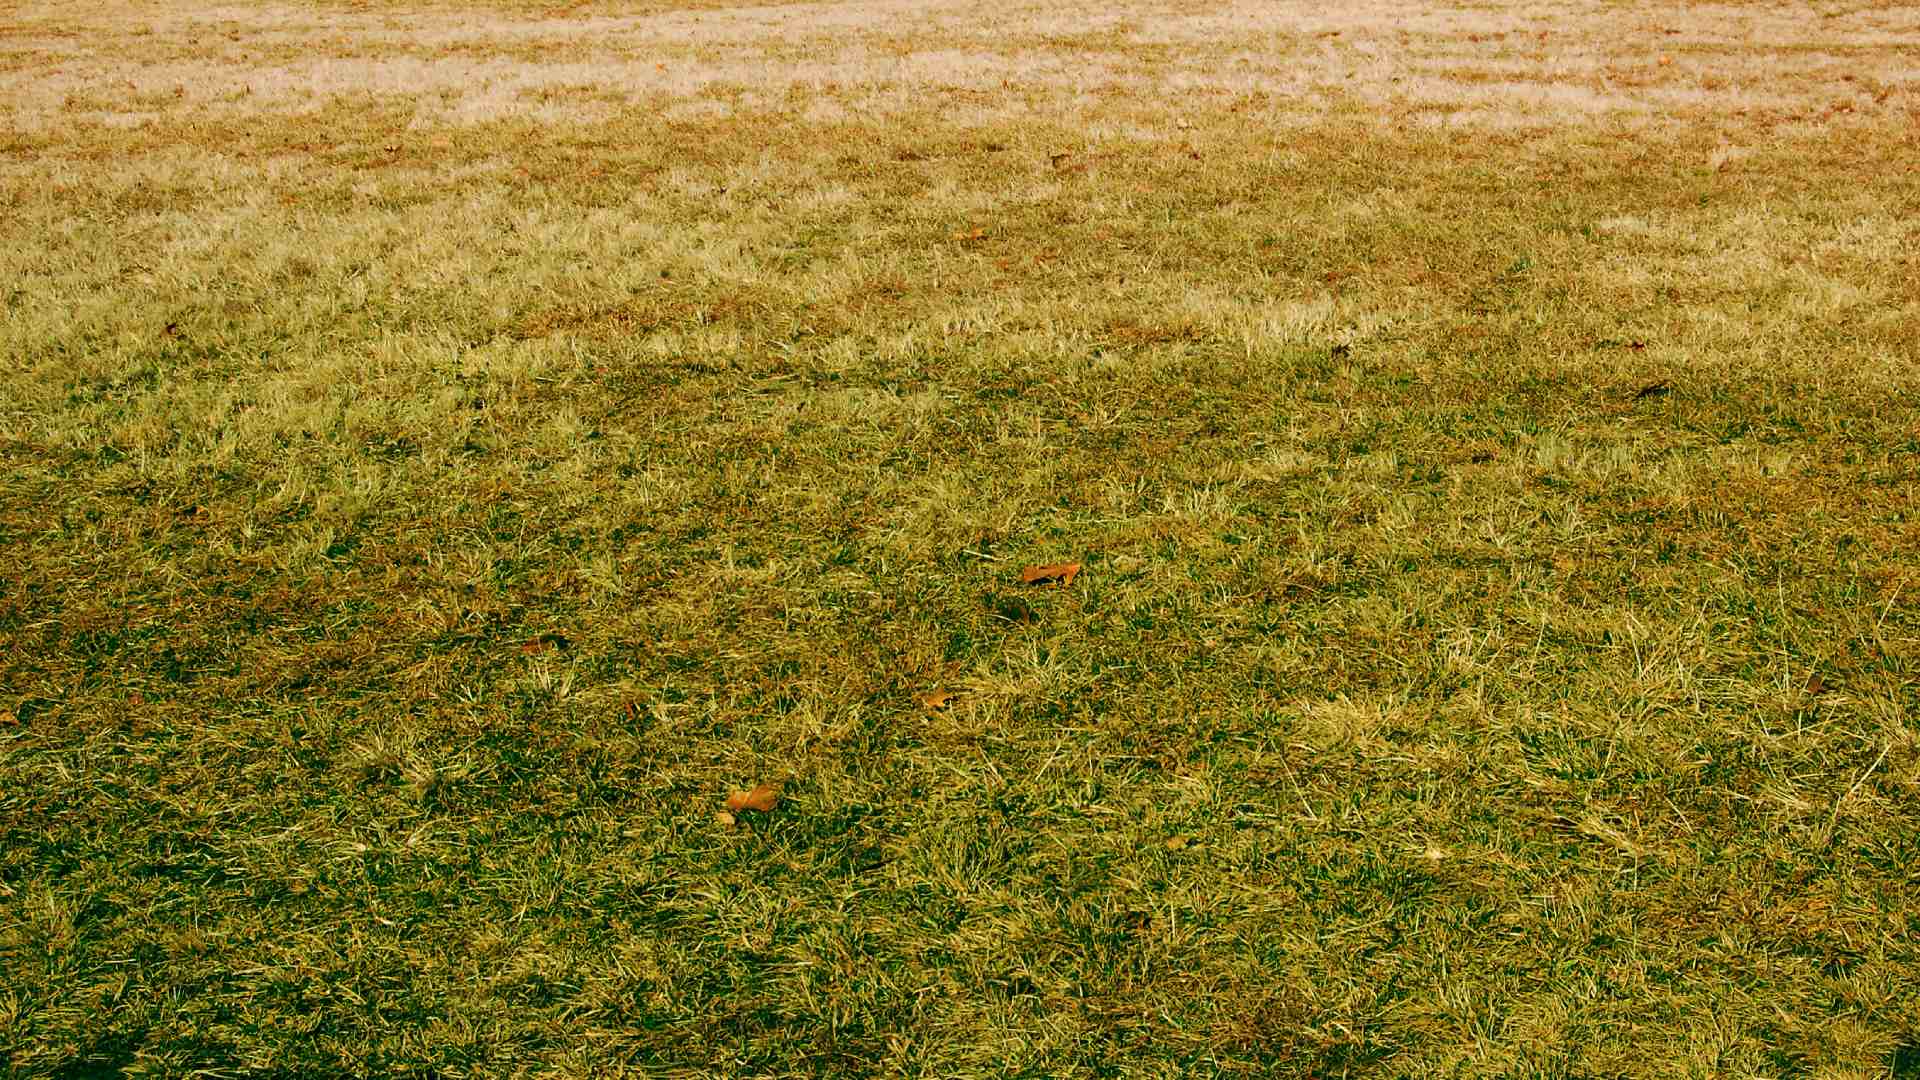 Is Your Lawn Full of Stubborn, Patchy Grass? Read This!